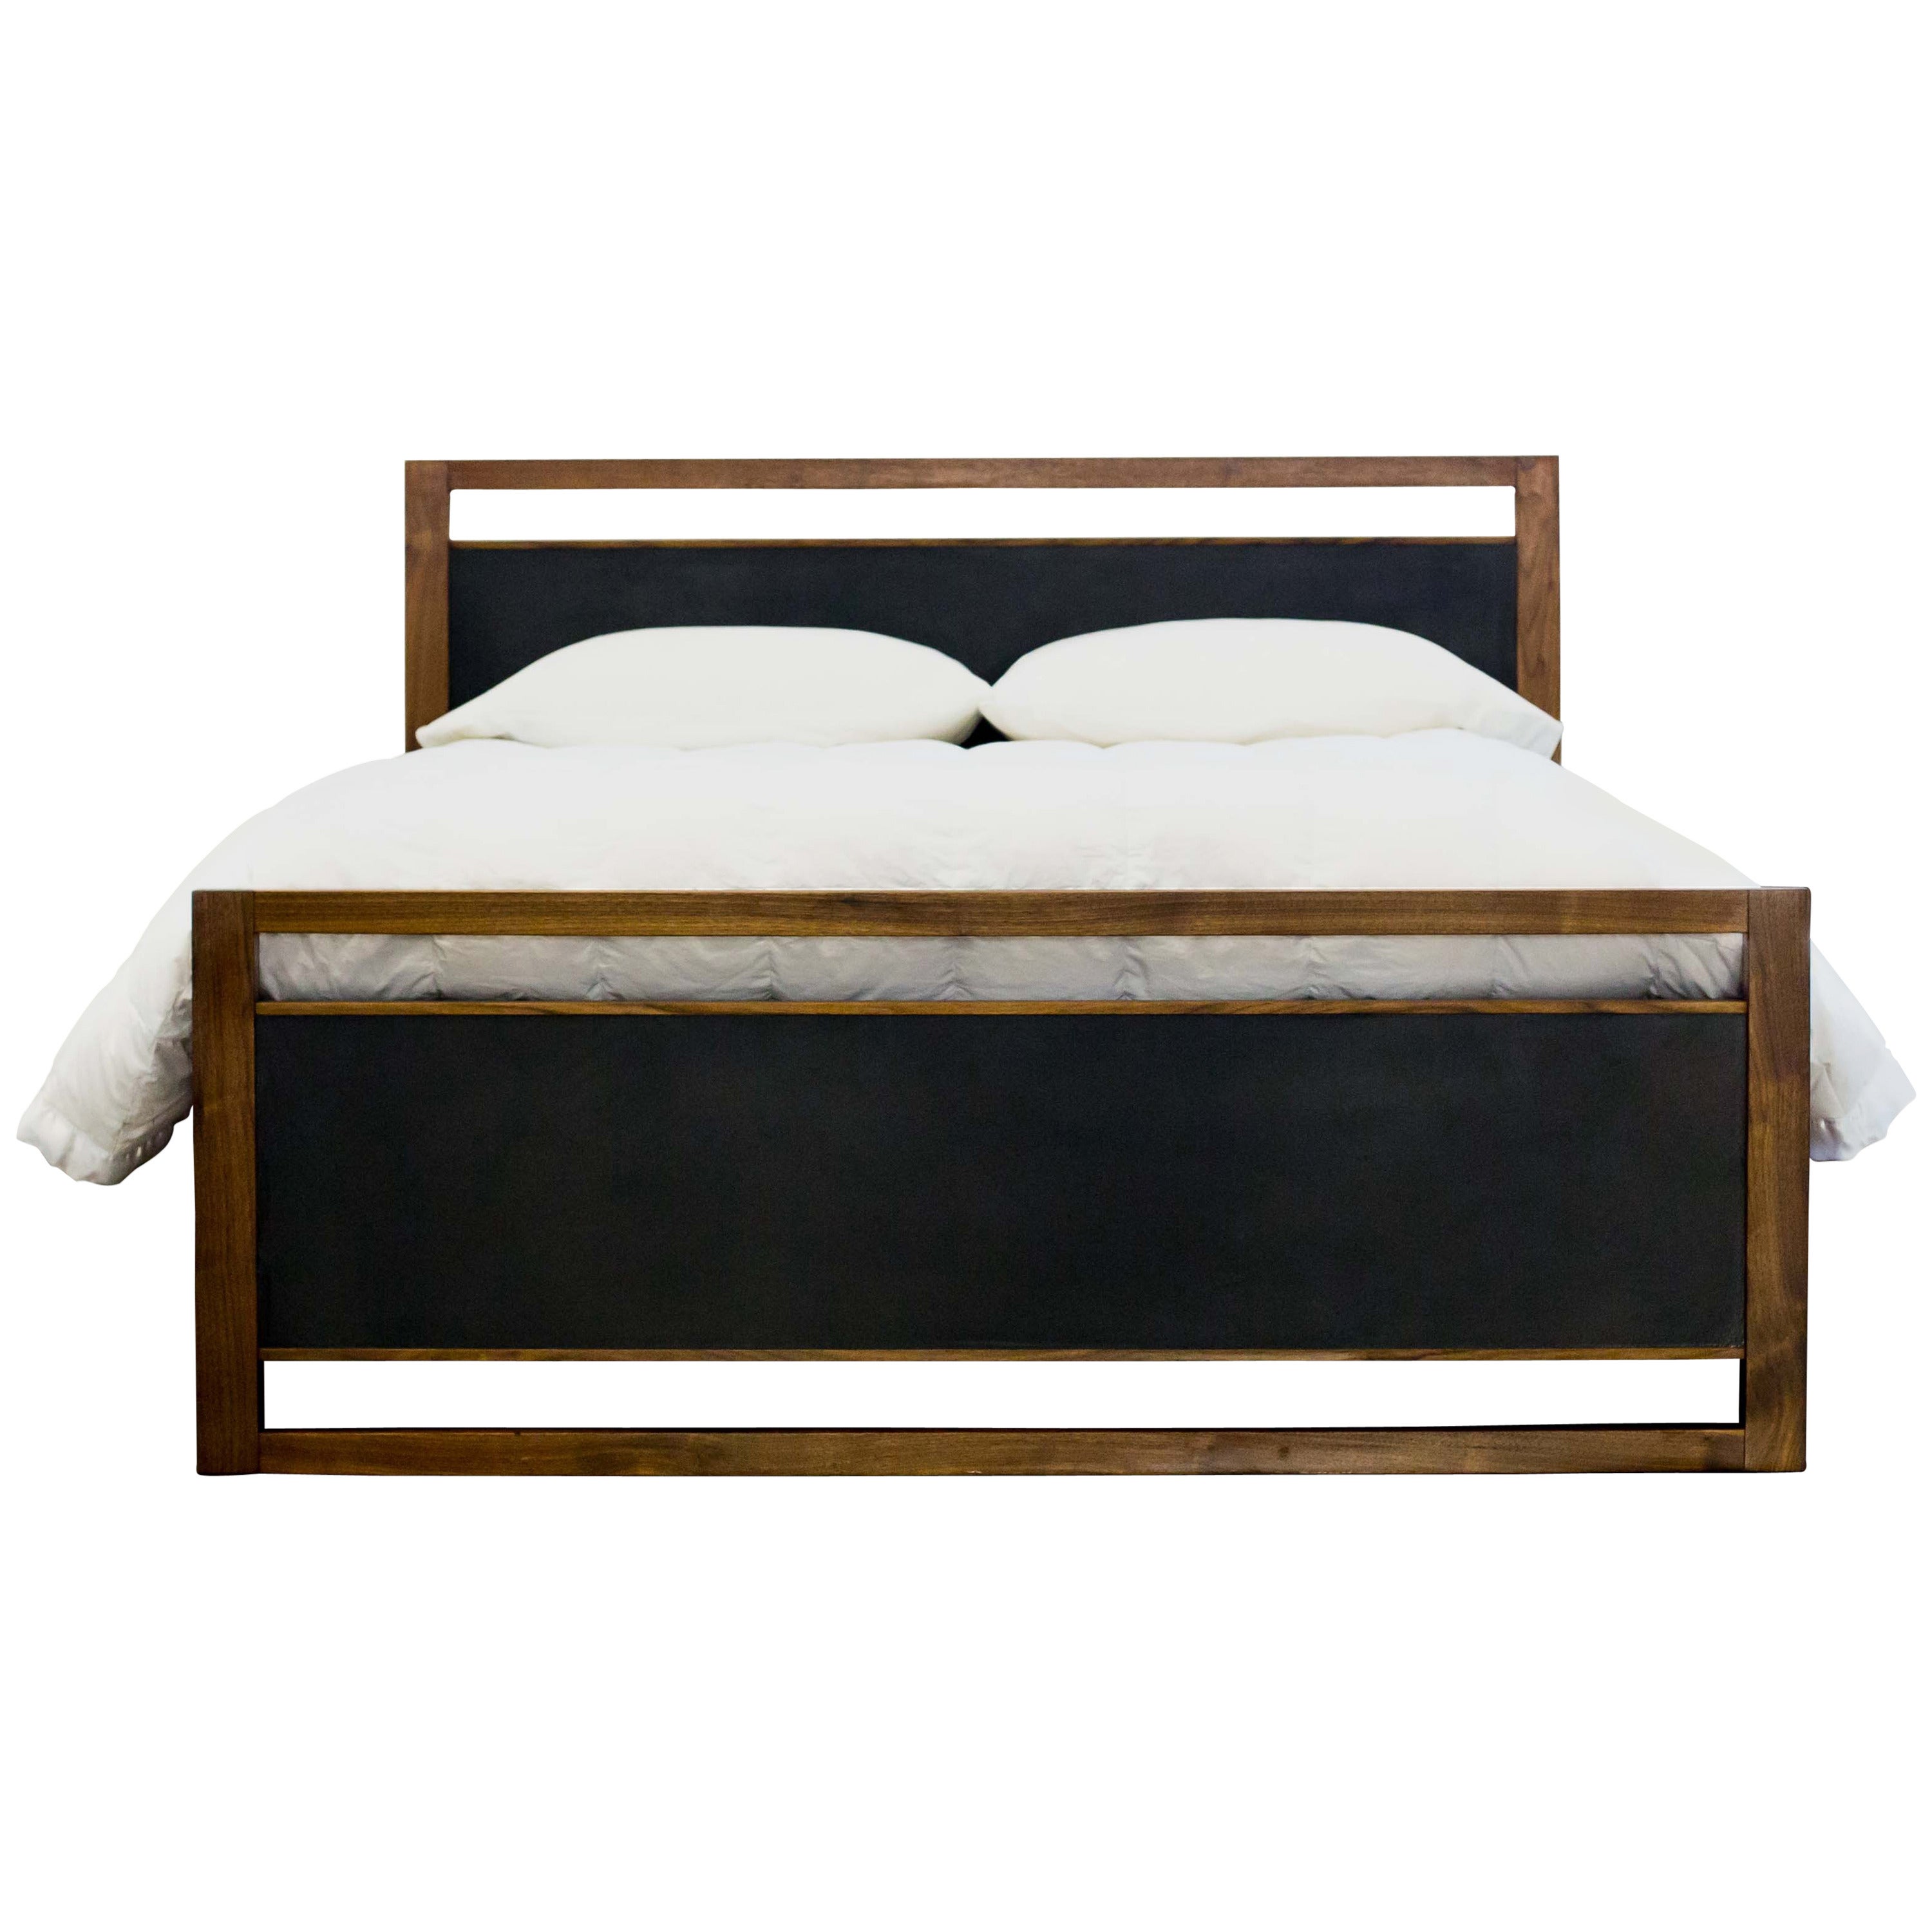 "Parallel" Bed in Walnut and Leather For Sale